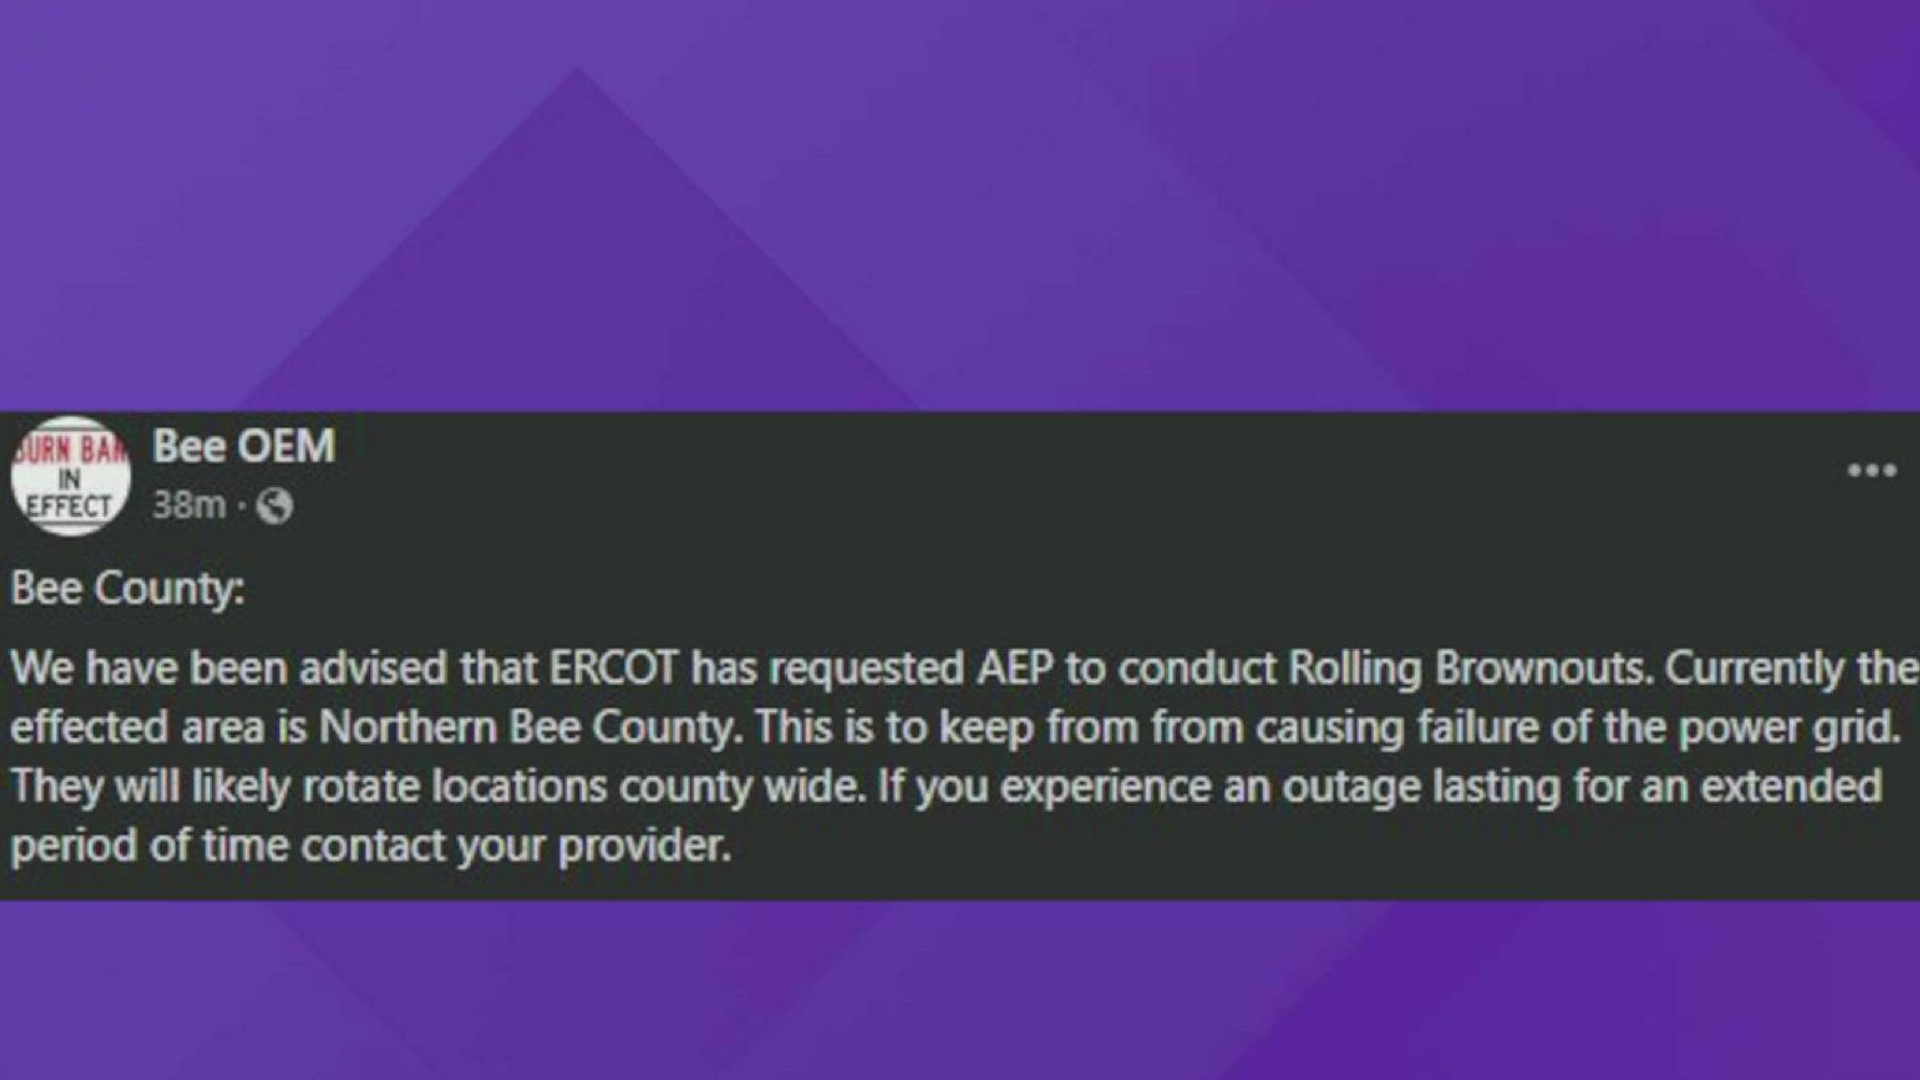 In Bee County, ERCOT has requested AEP to conduct Rolling Brownouts.